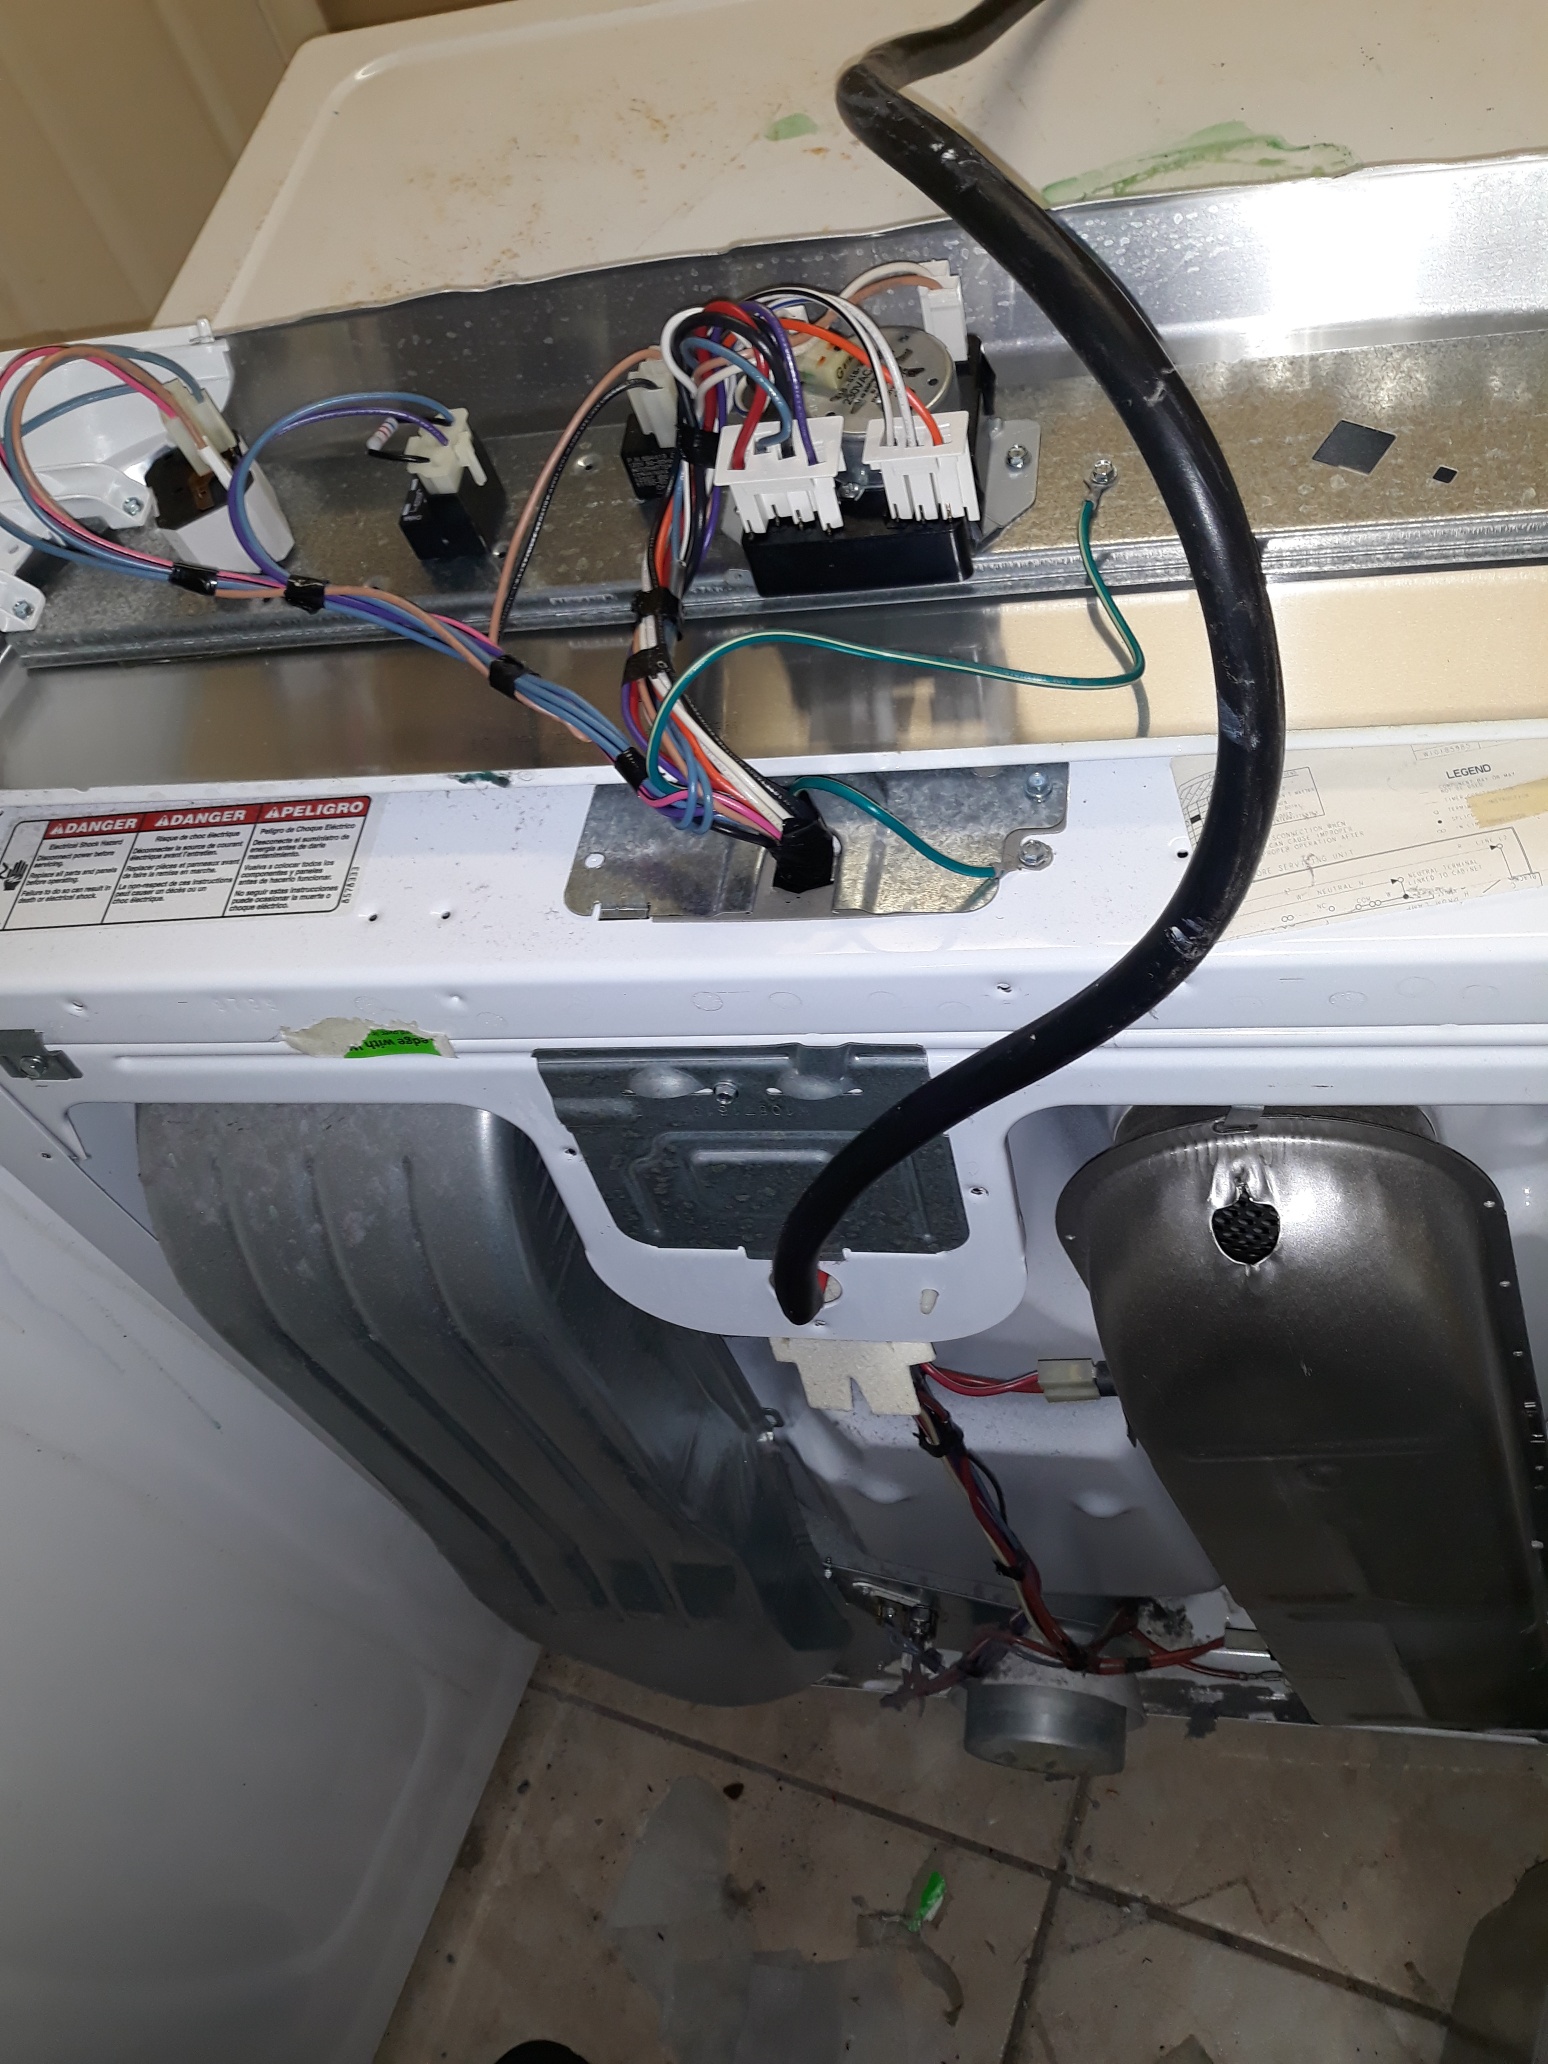 appliance repair dryer repair repair require replacement of several failed parts old river road weirsdale fl 32195